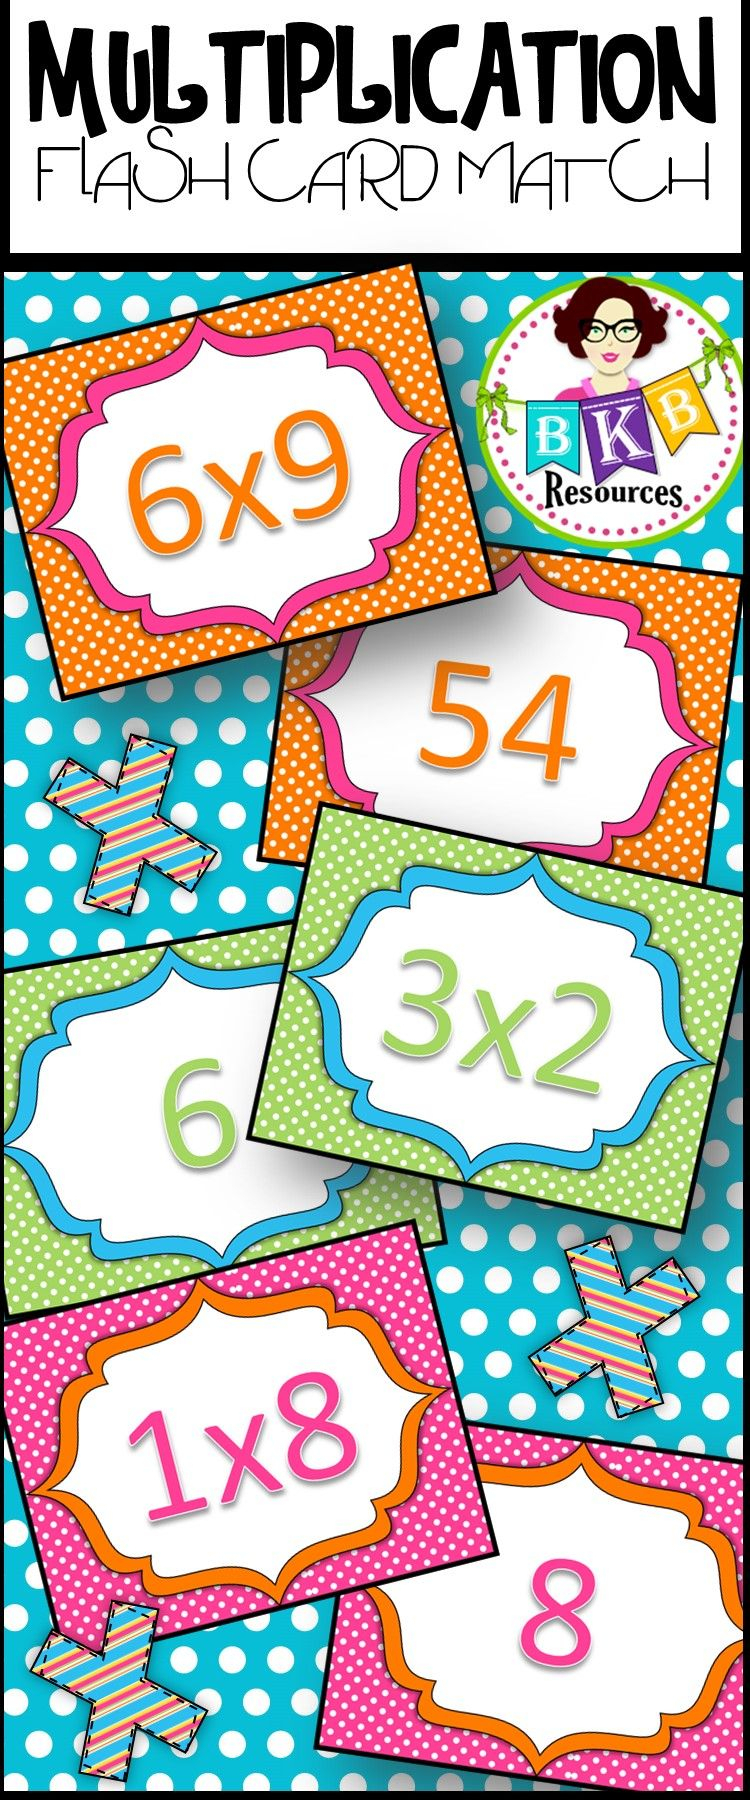 Multiplication Flash Card Match | Multiplication, Learning in Printable Multiplication Flash Cards 1-12